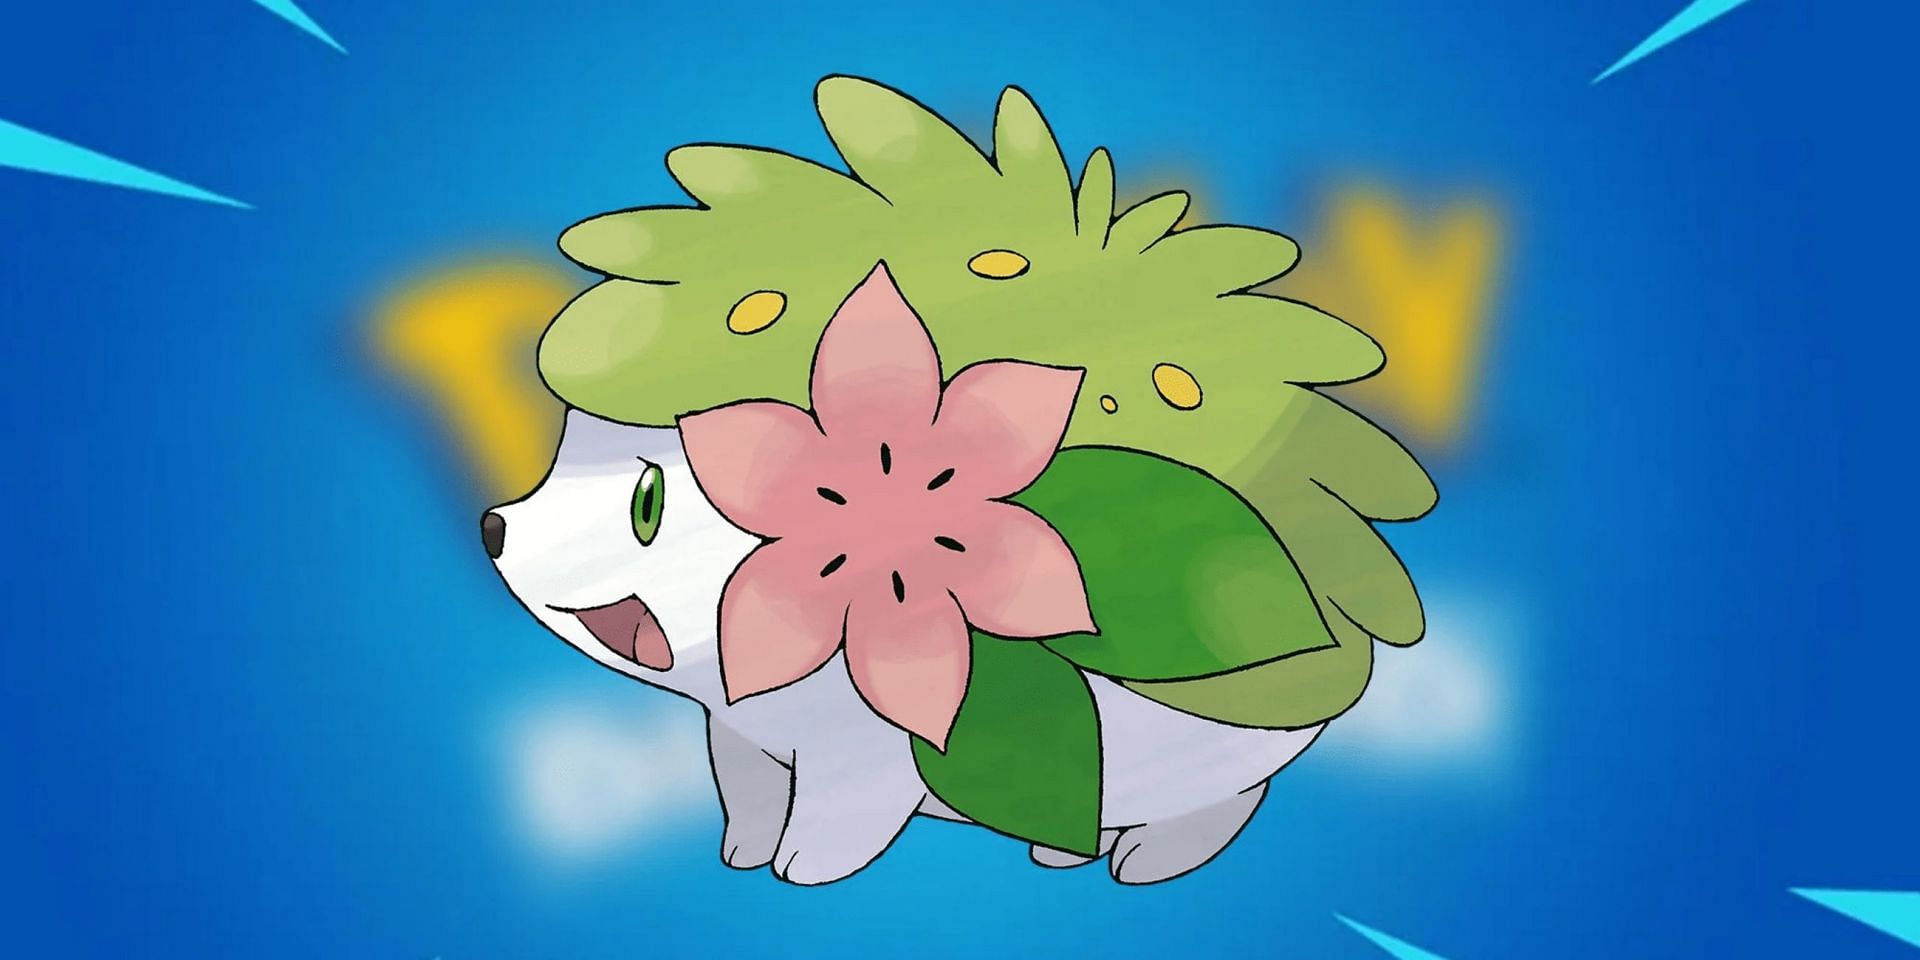 Shaymin will soon be released during a Pokemon GO event (Image via The Pokemon Company)